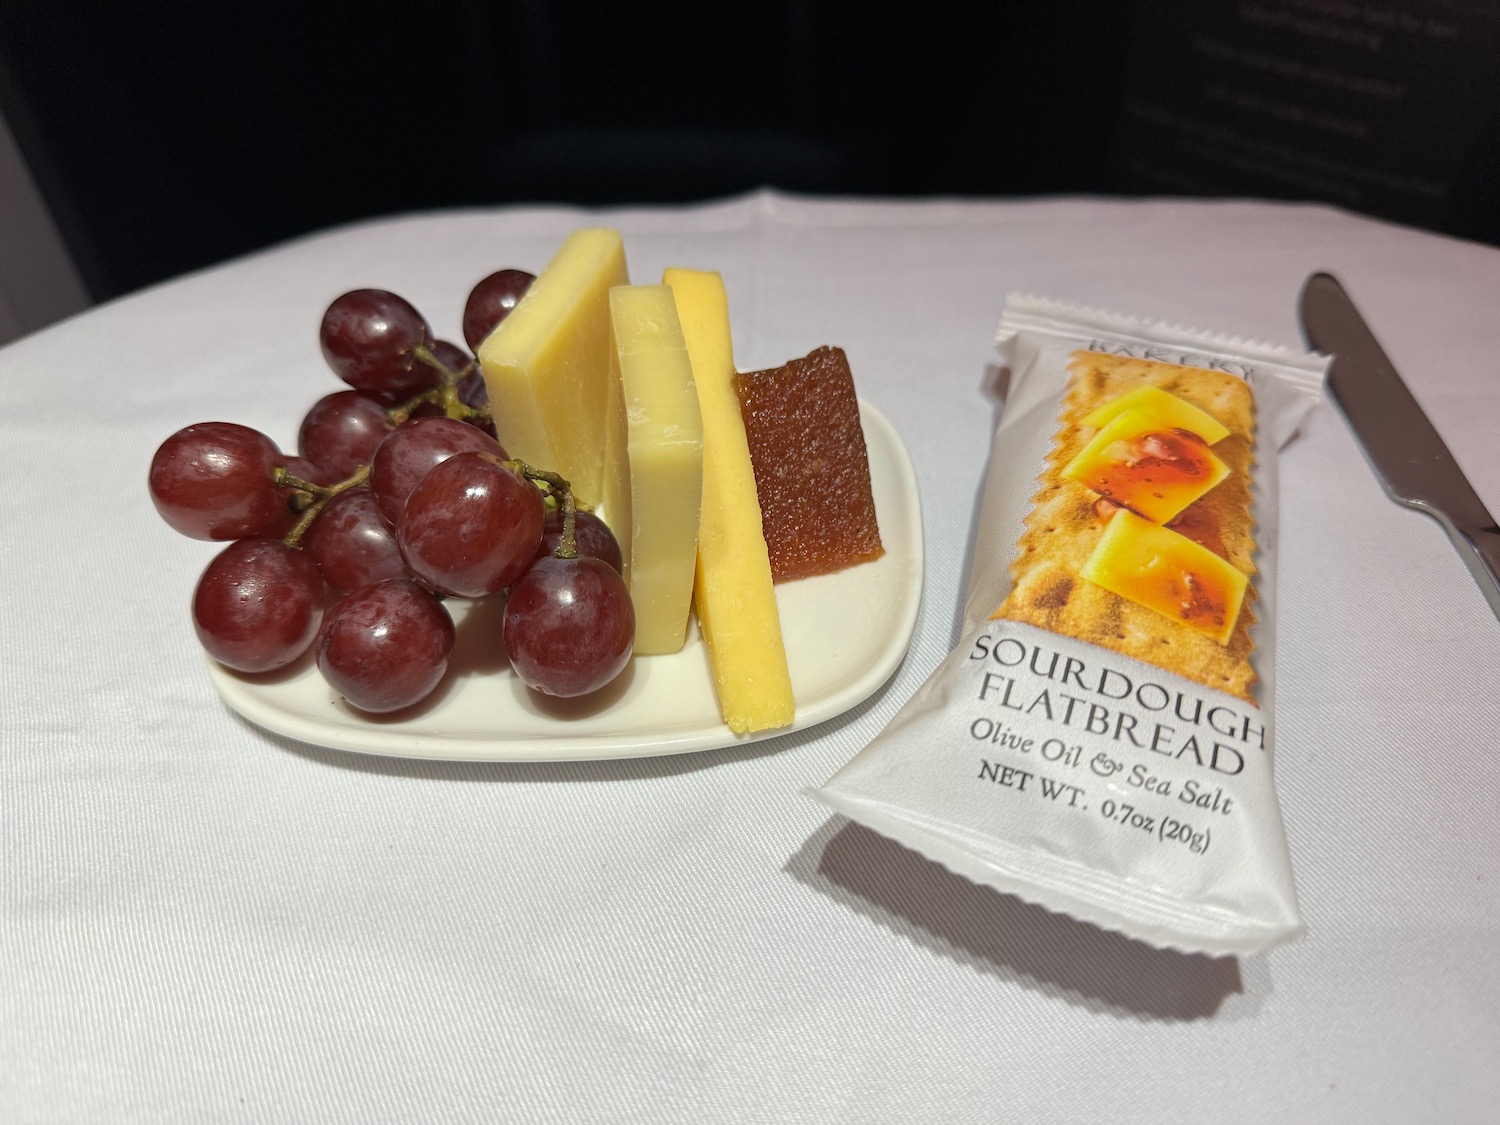 a plate of cheese grapes and a packet of bread